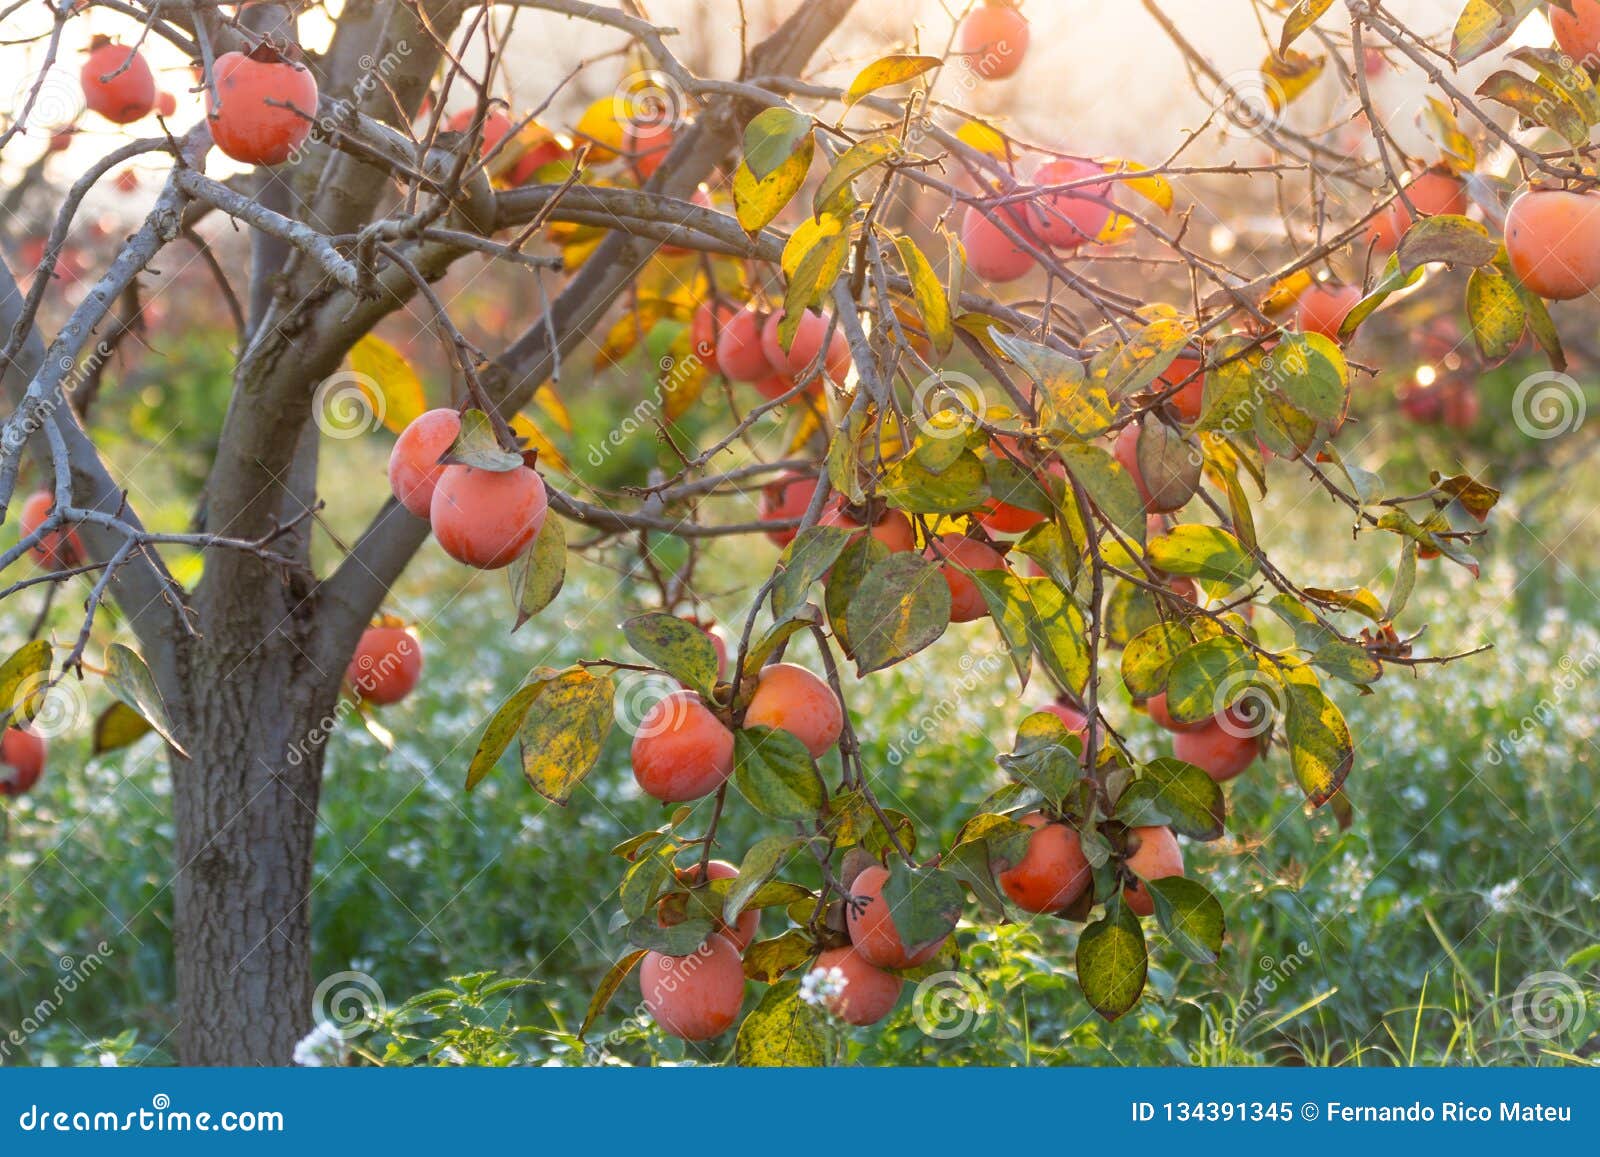 sweet persimmons on trees in autumn in spain at sunrise